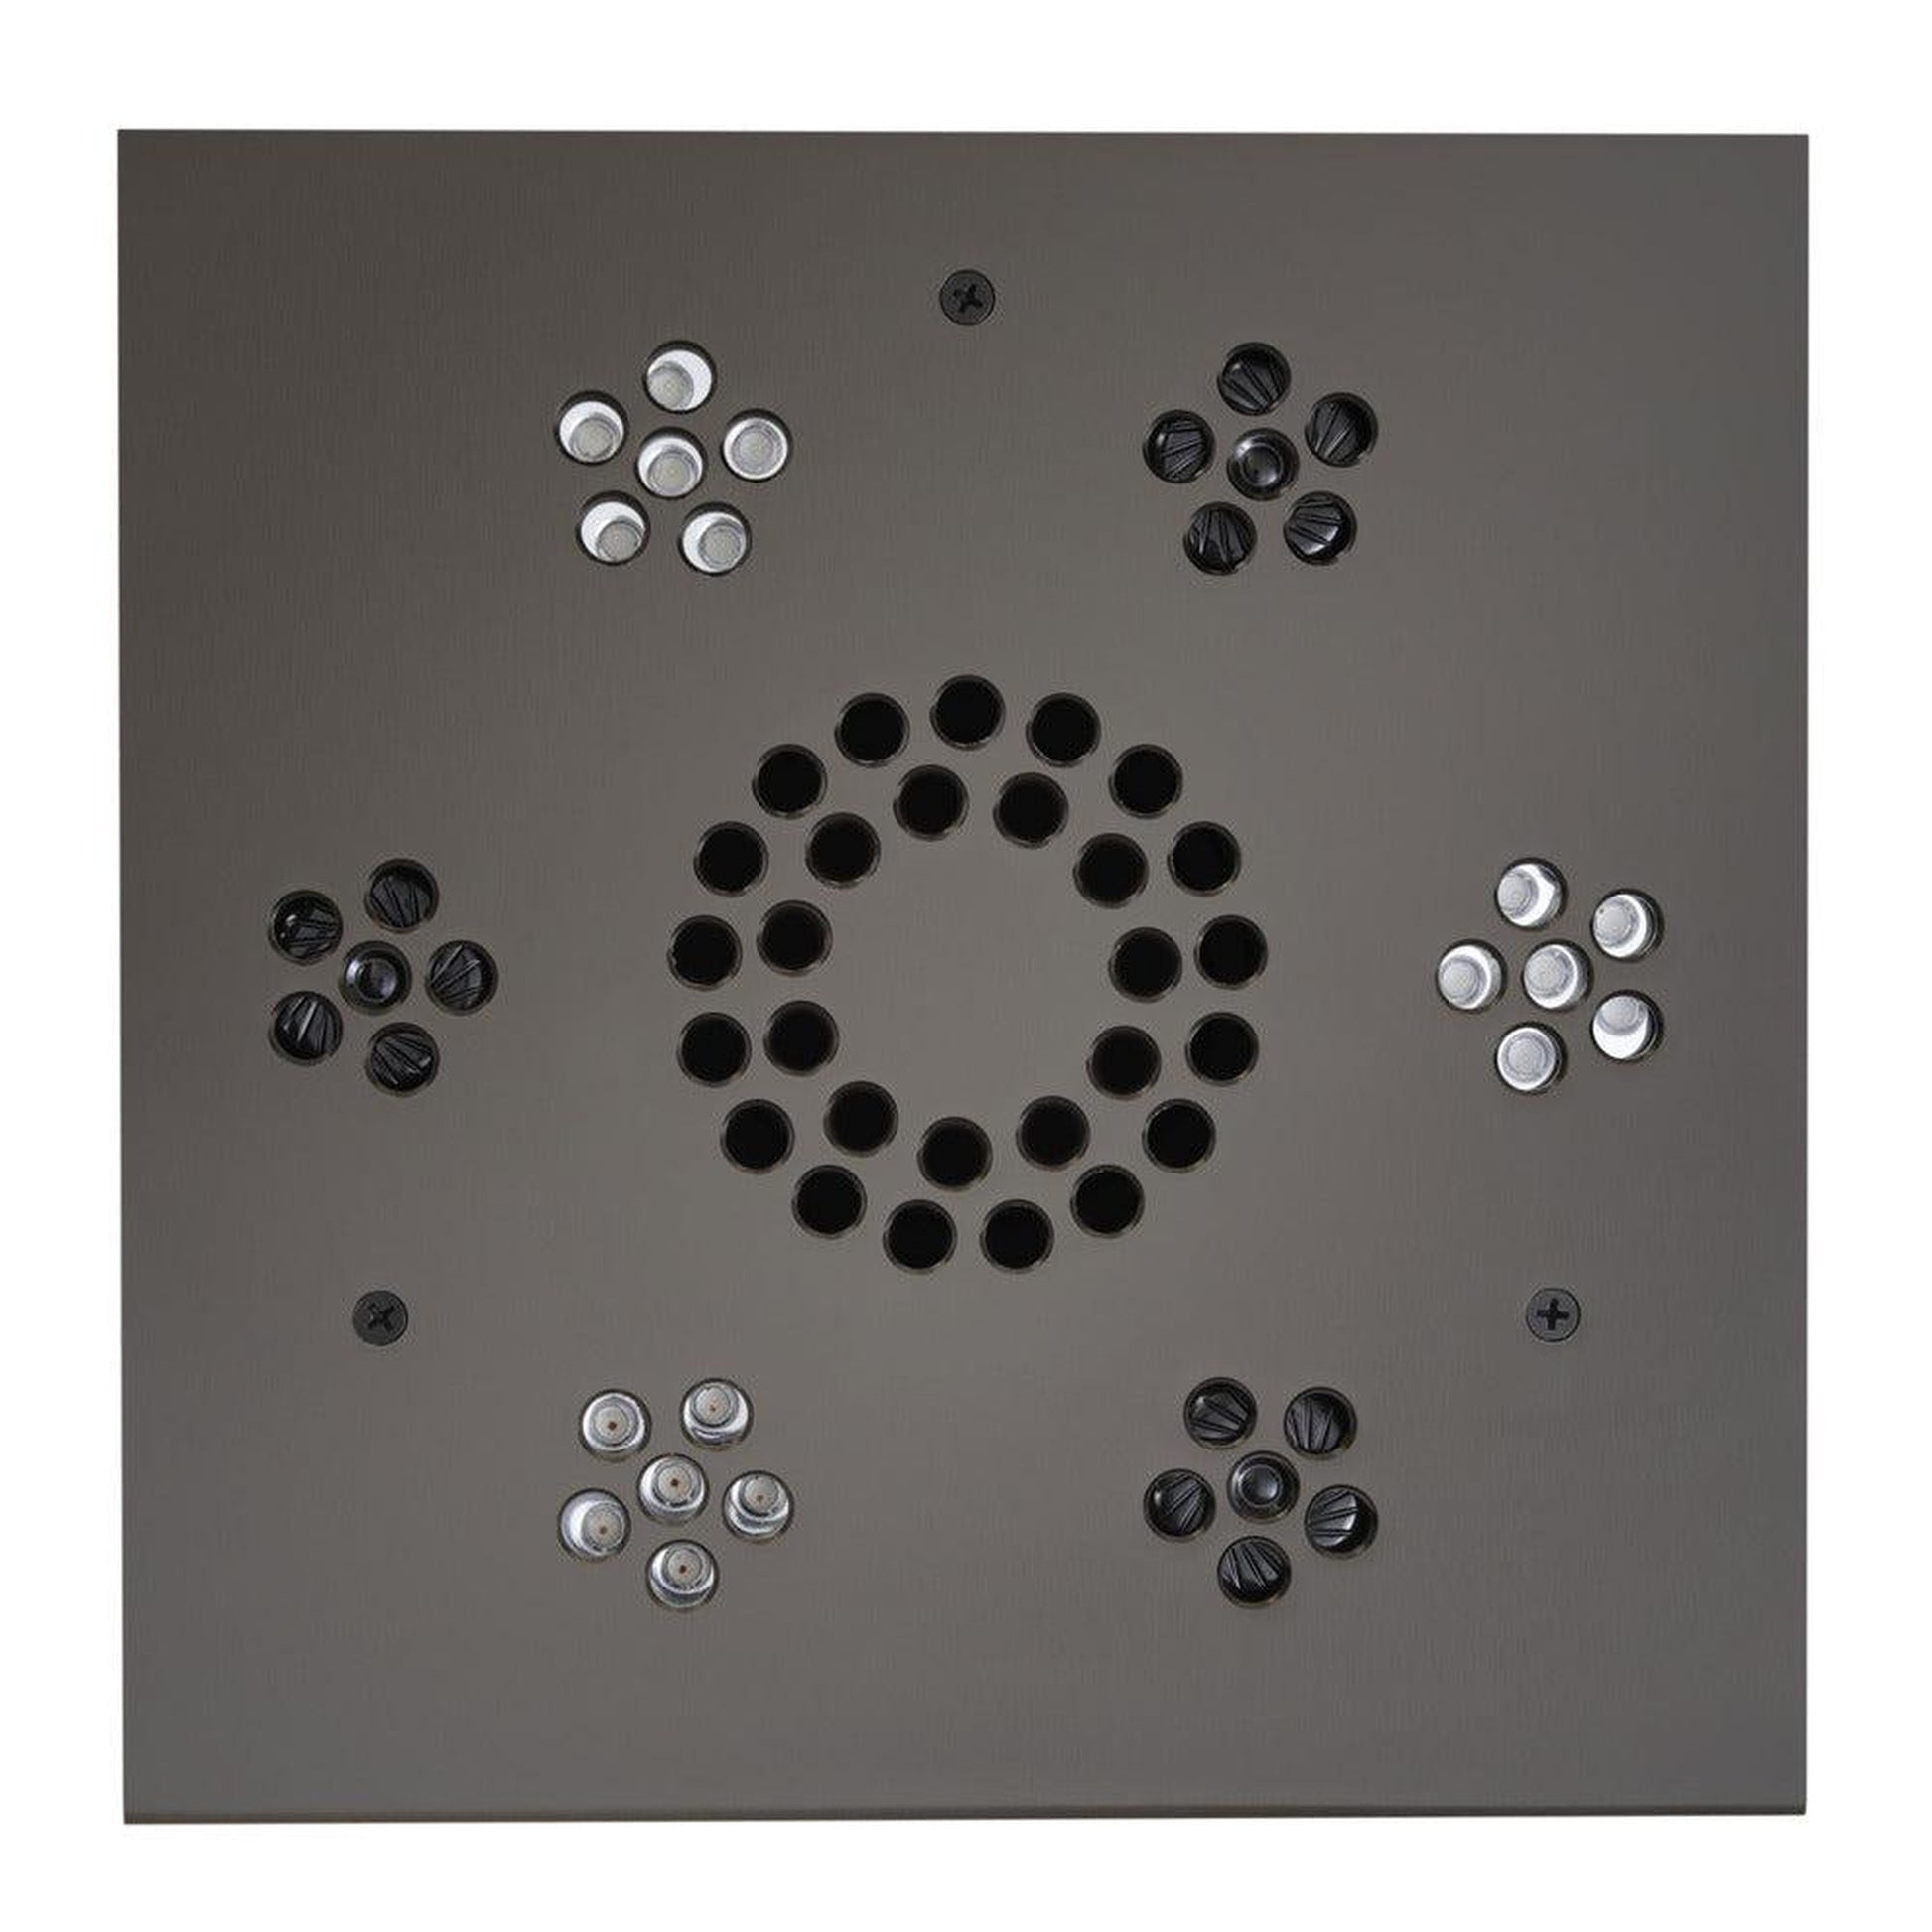 ThermaSol 10" x 10" Black Nickel Finish Square Serenity Essential Light and Music System Modern